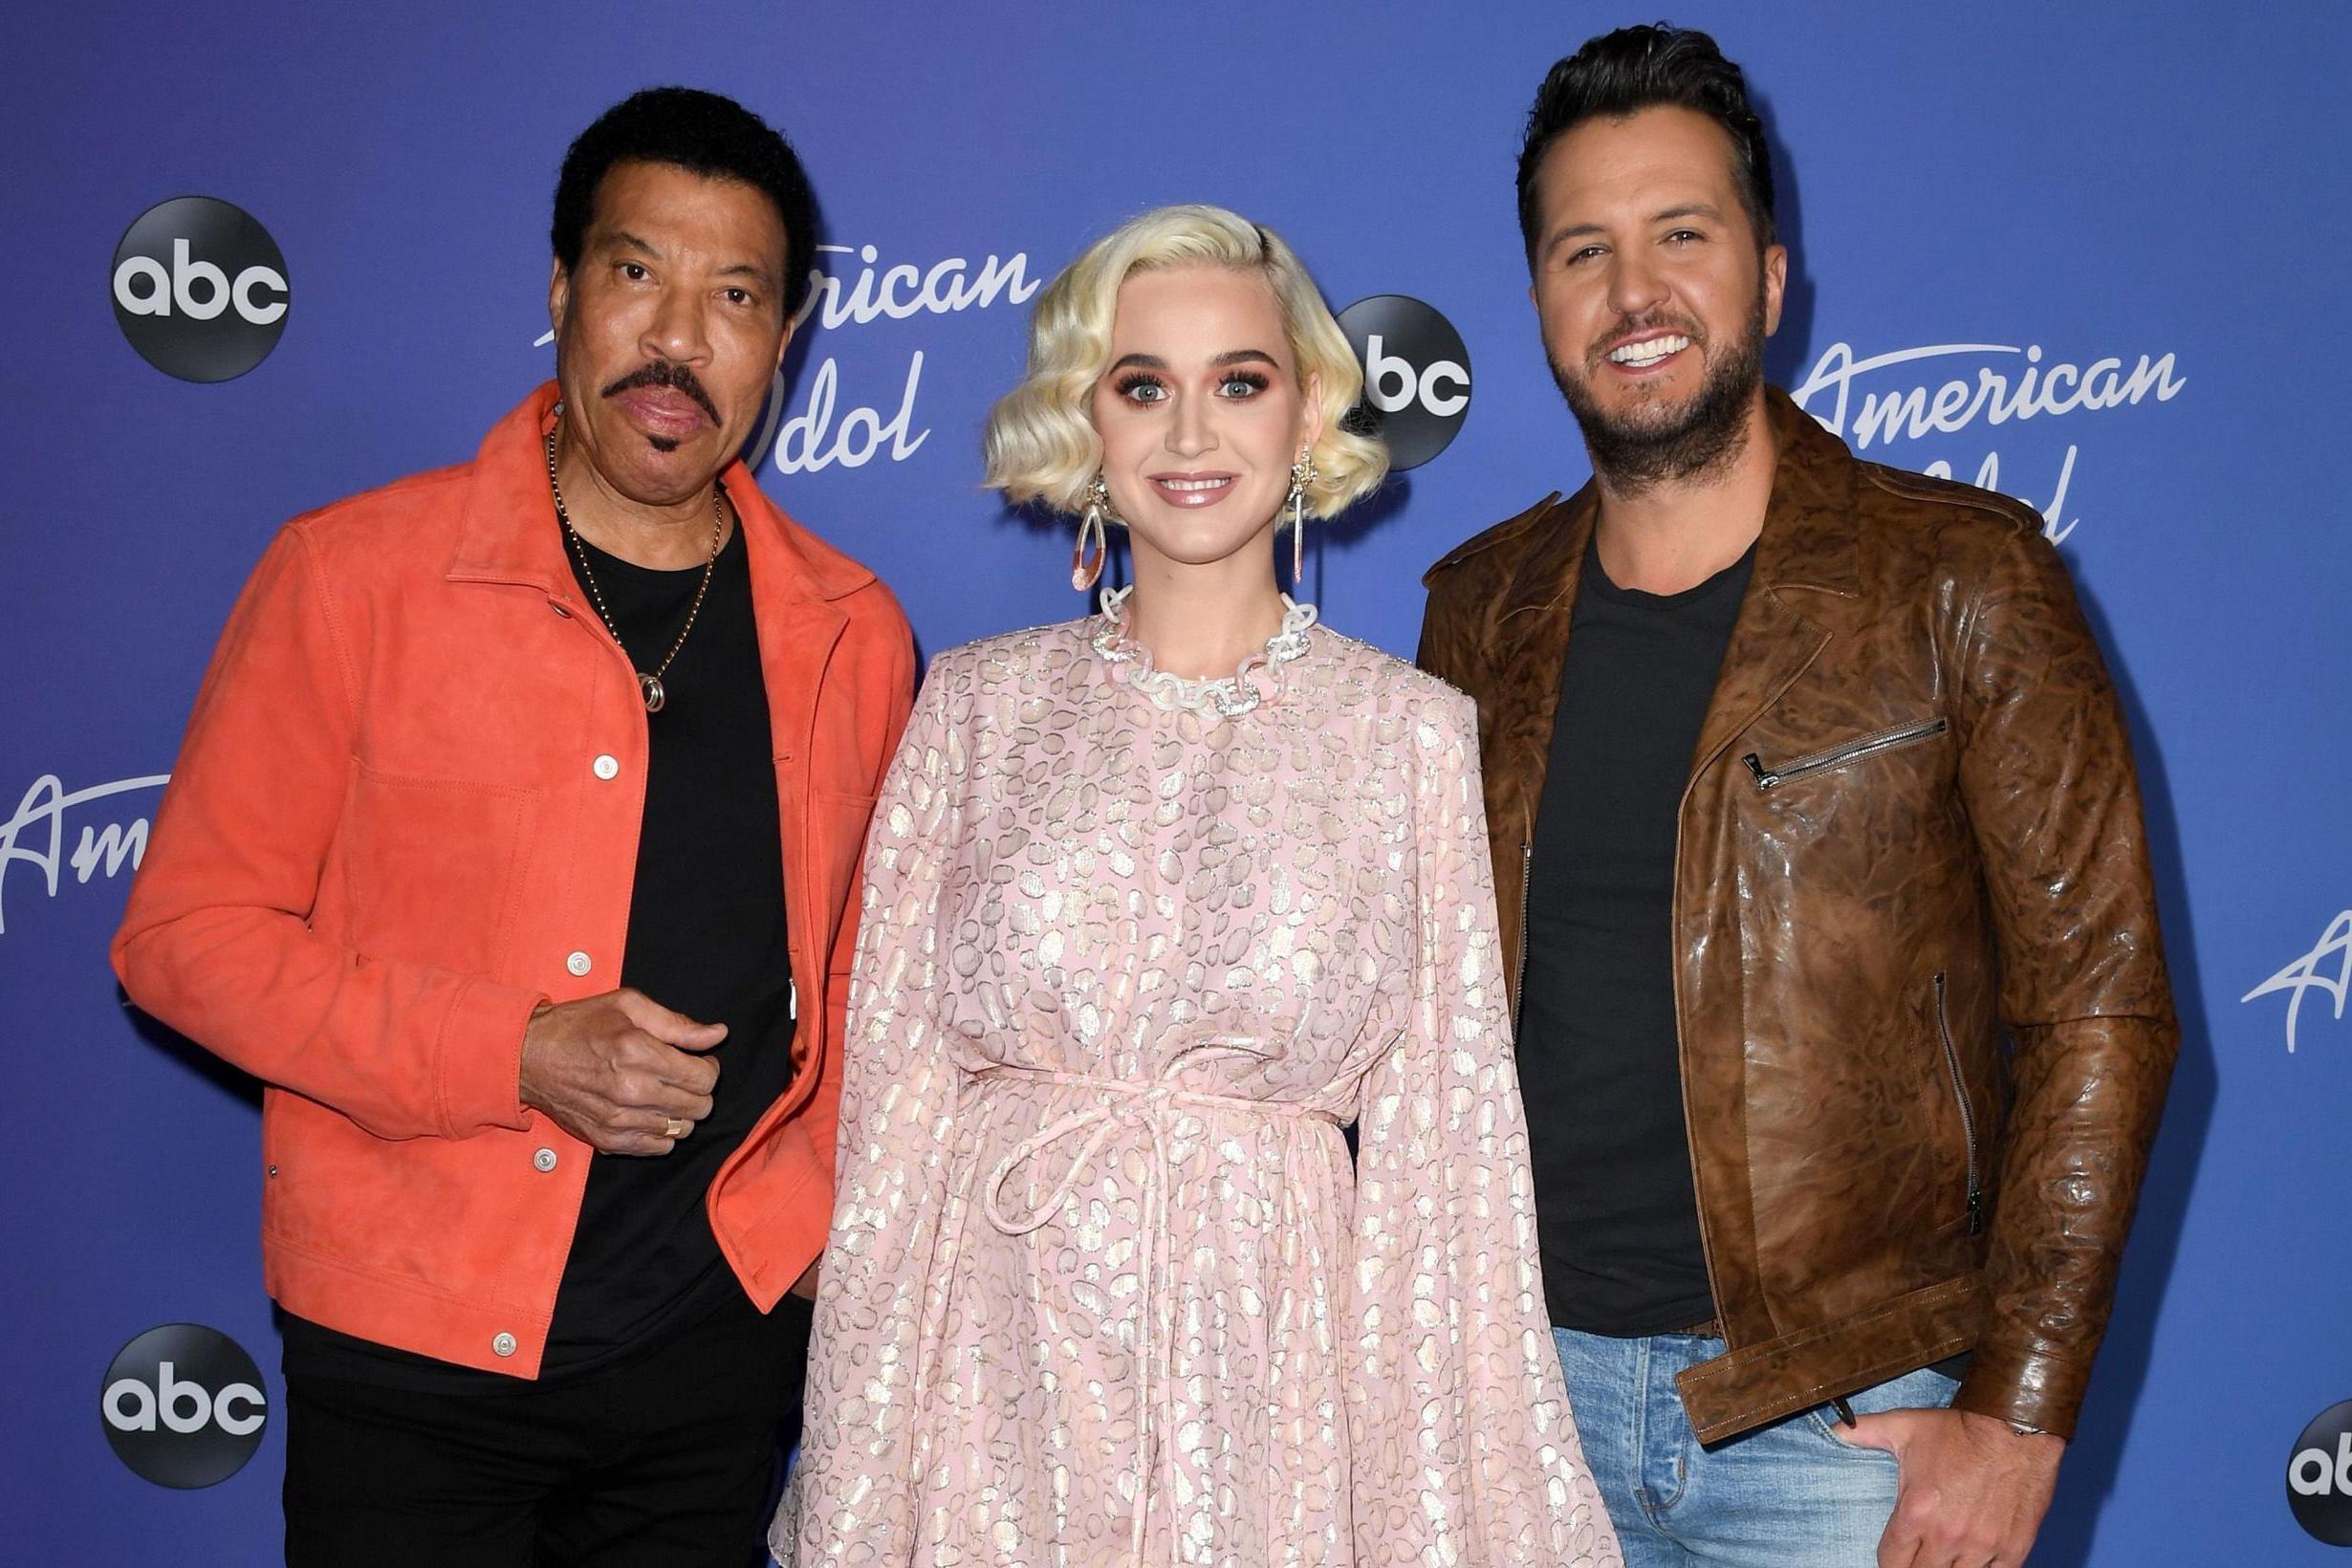 American Idol to continue despite coronavirus with contestants performing from home